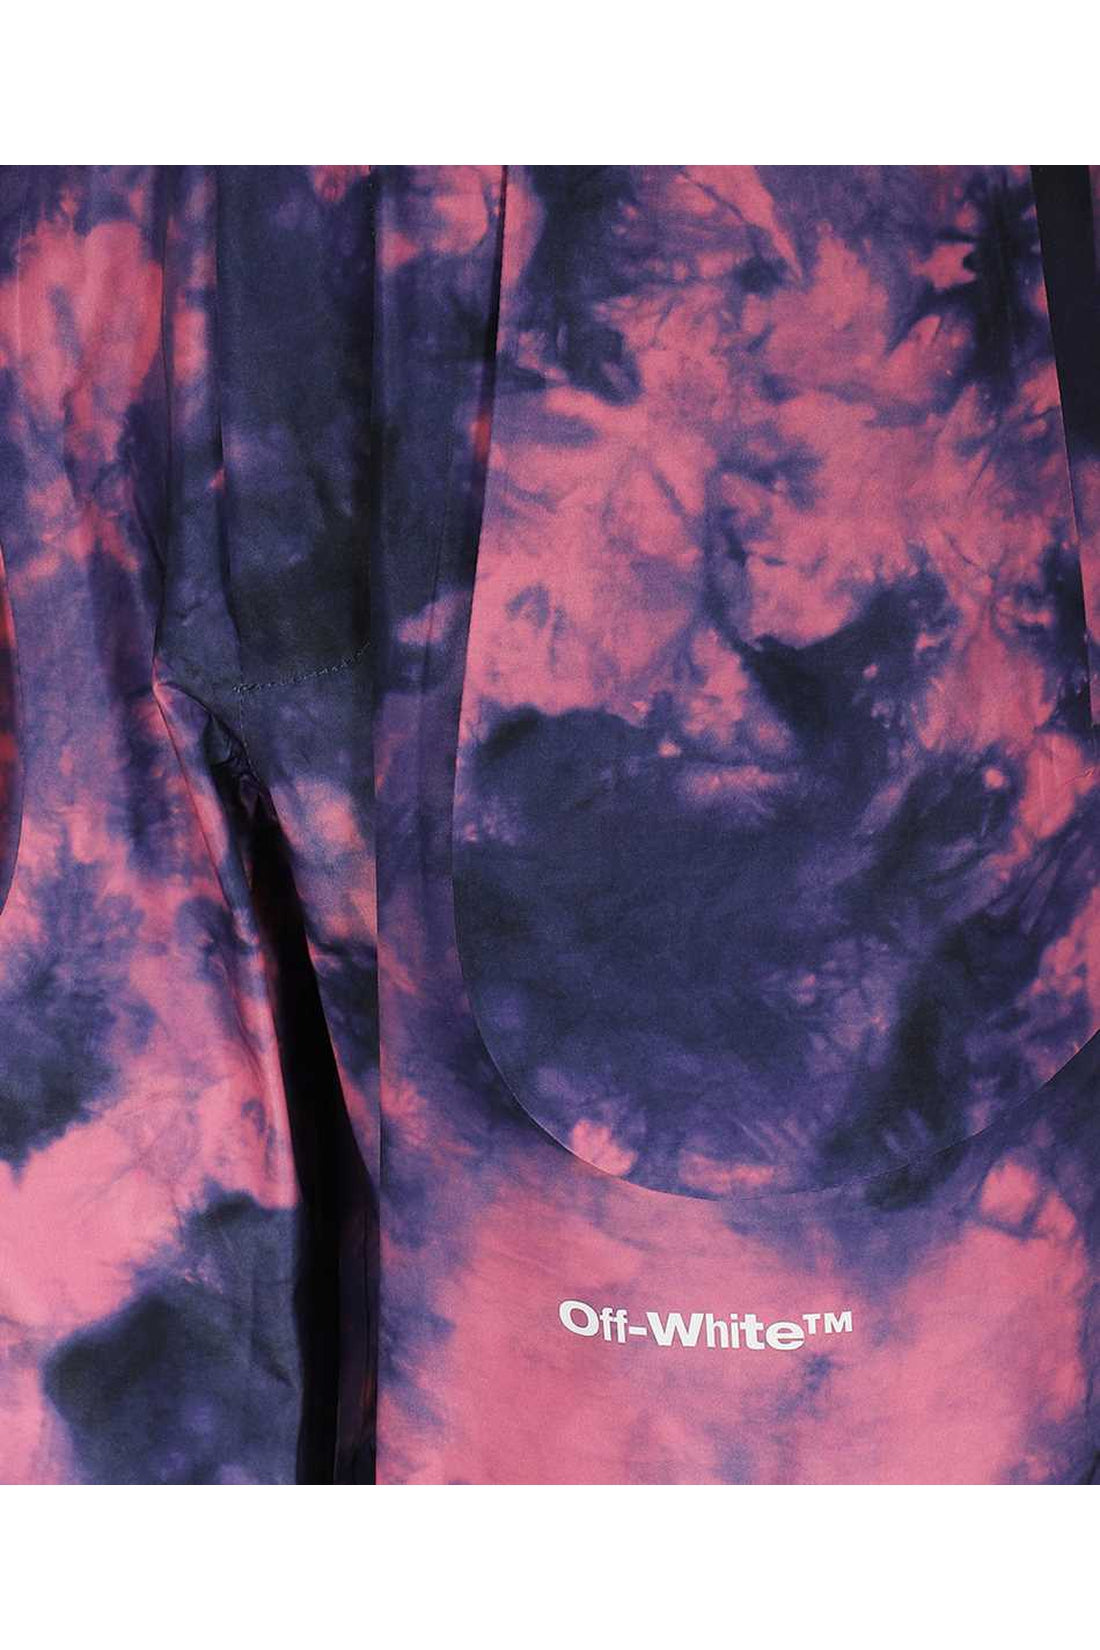 Off-White-OUTLET-SALE-Ski trousers-ARCHIVIST